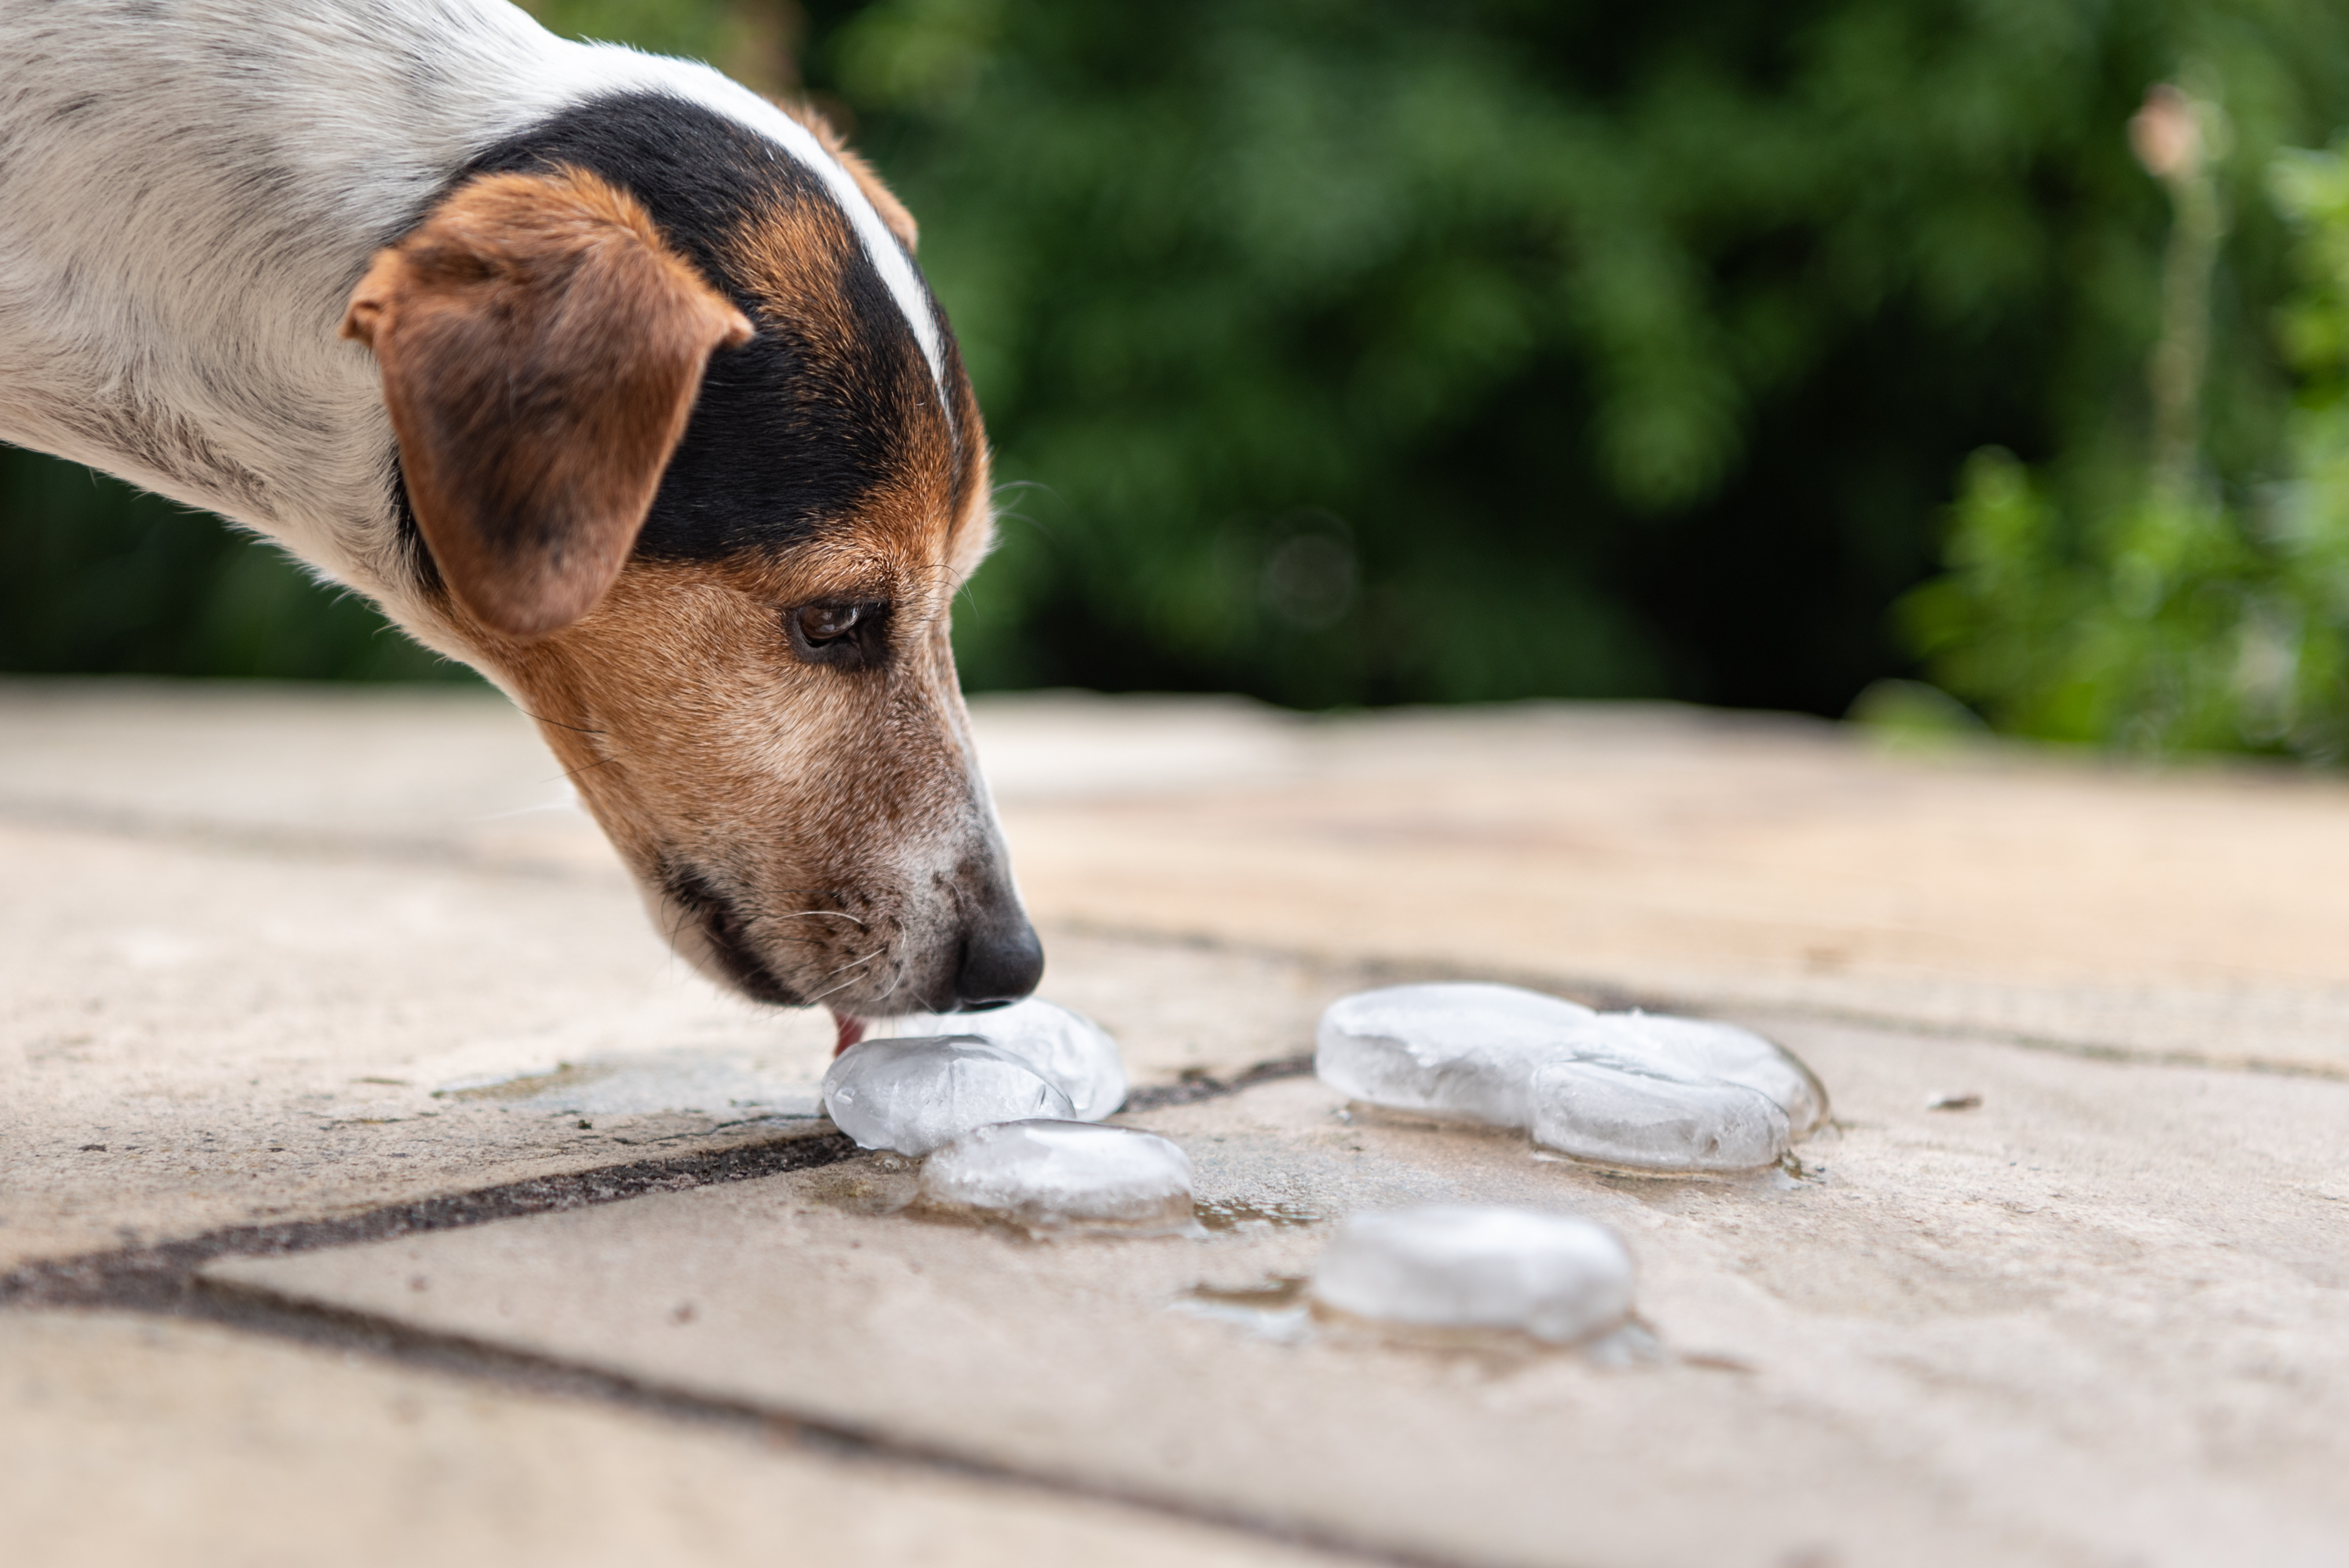 How To Turn Dog Toys Into Frozen Treats